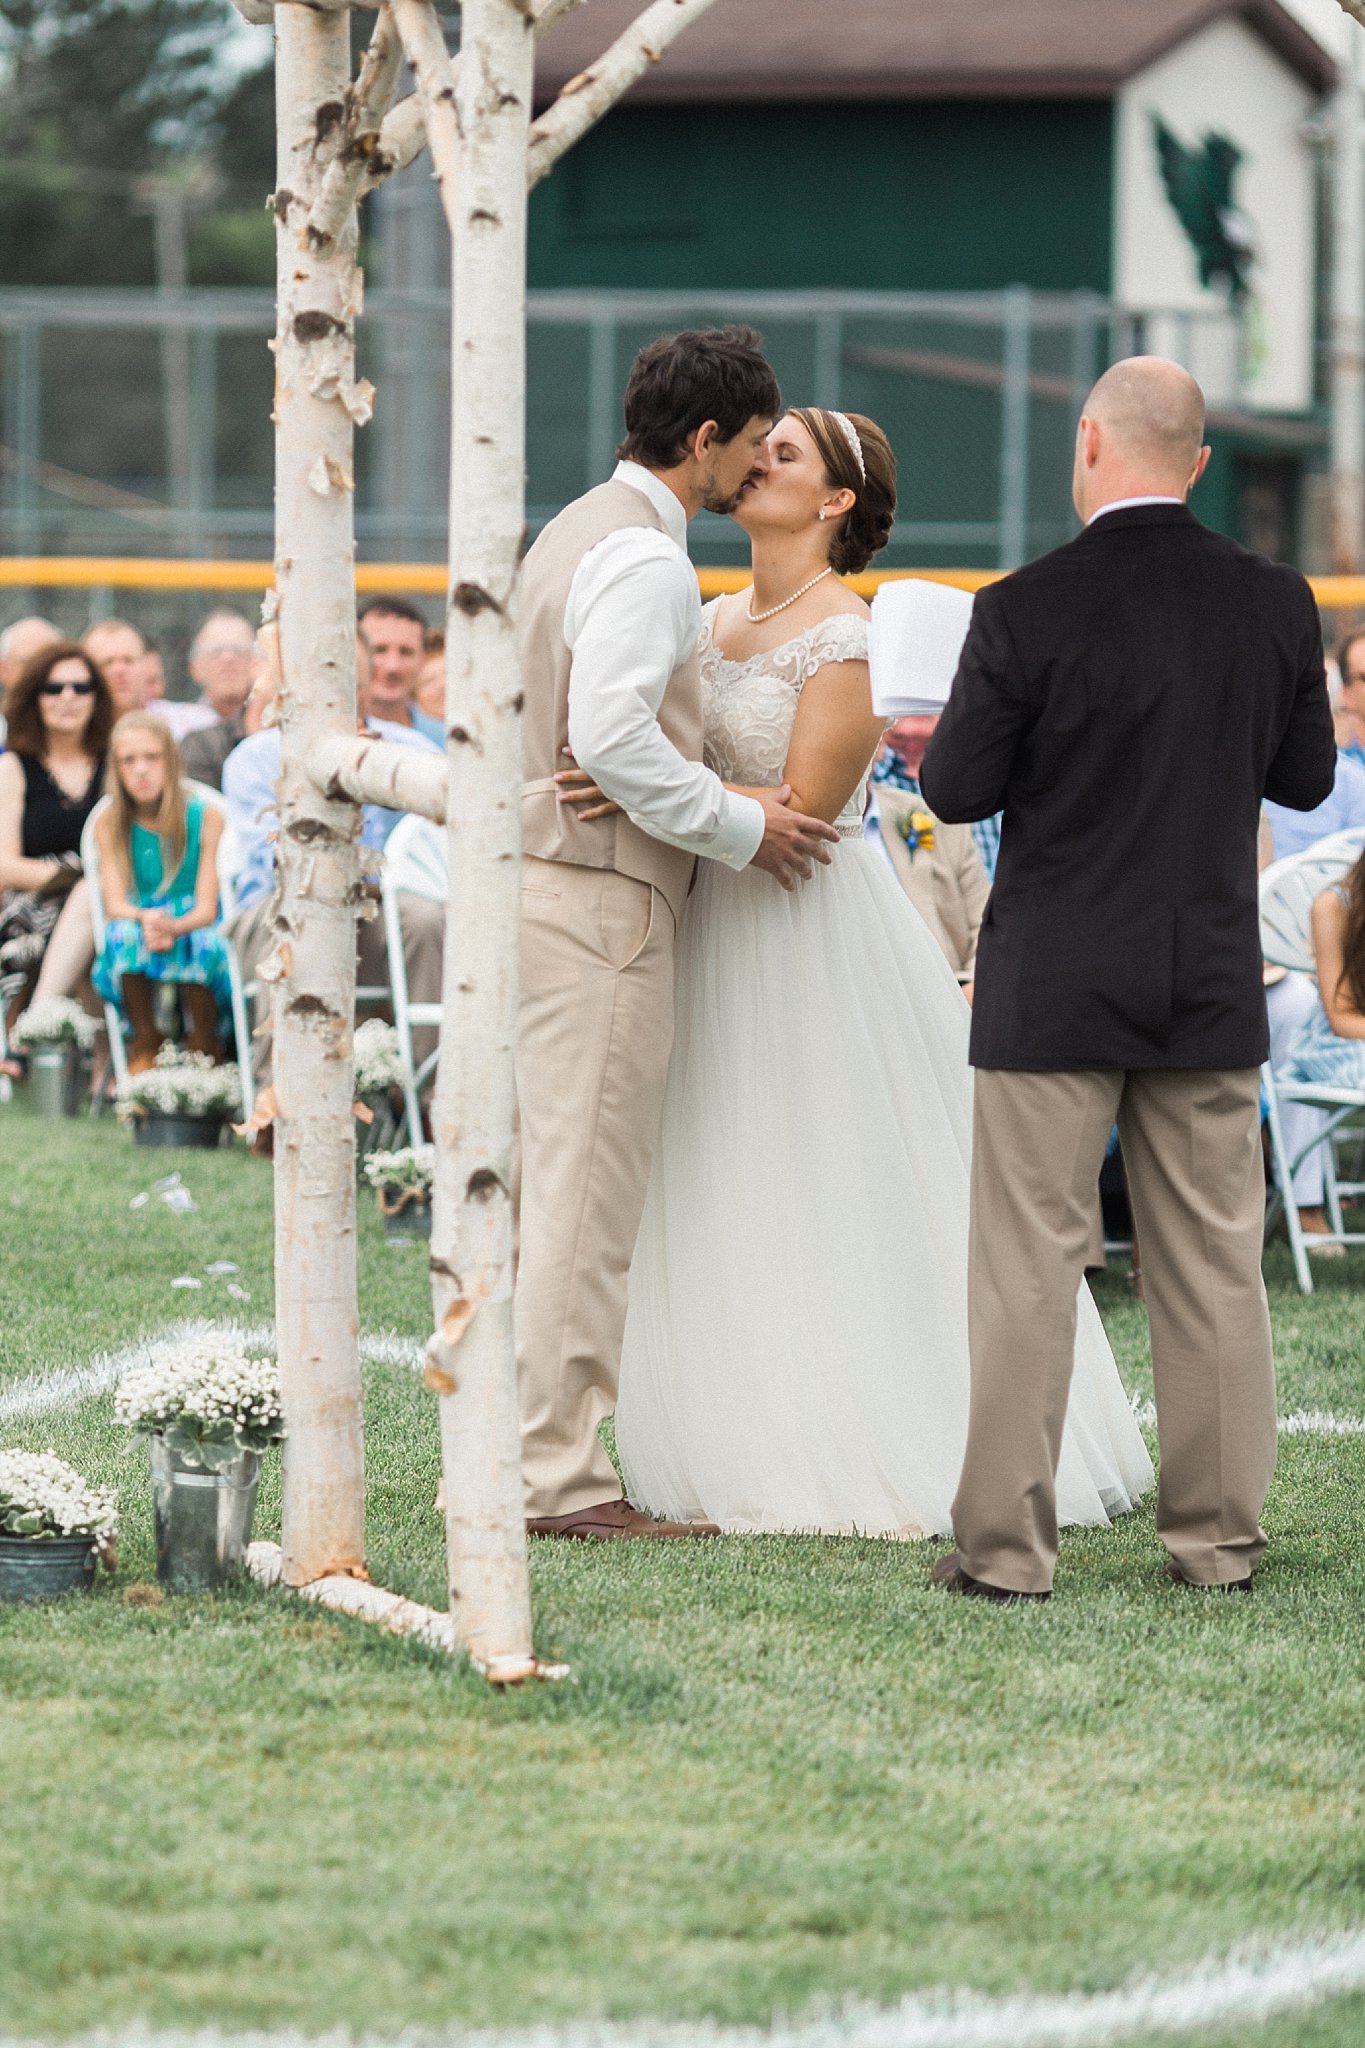 www.james-stokes.com | James Stokes Photography, LLC - Rustic and romantic wedding ceremony photos by Wisconsin wedding photographer